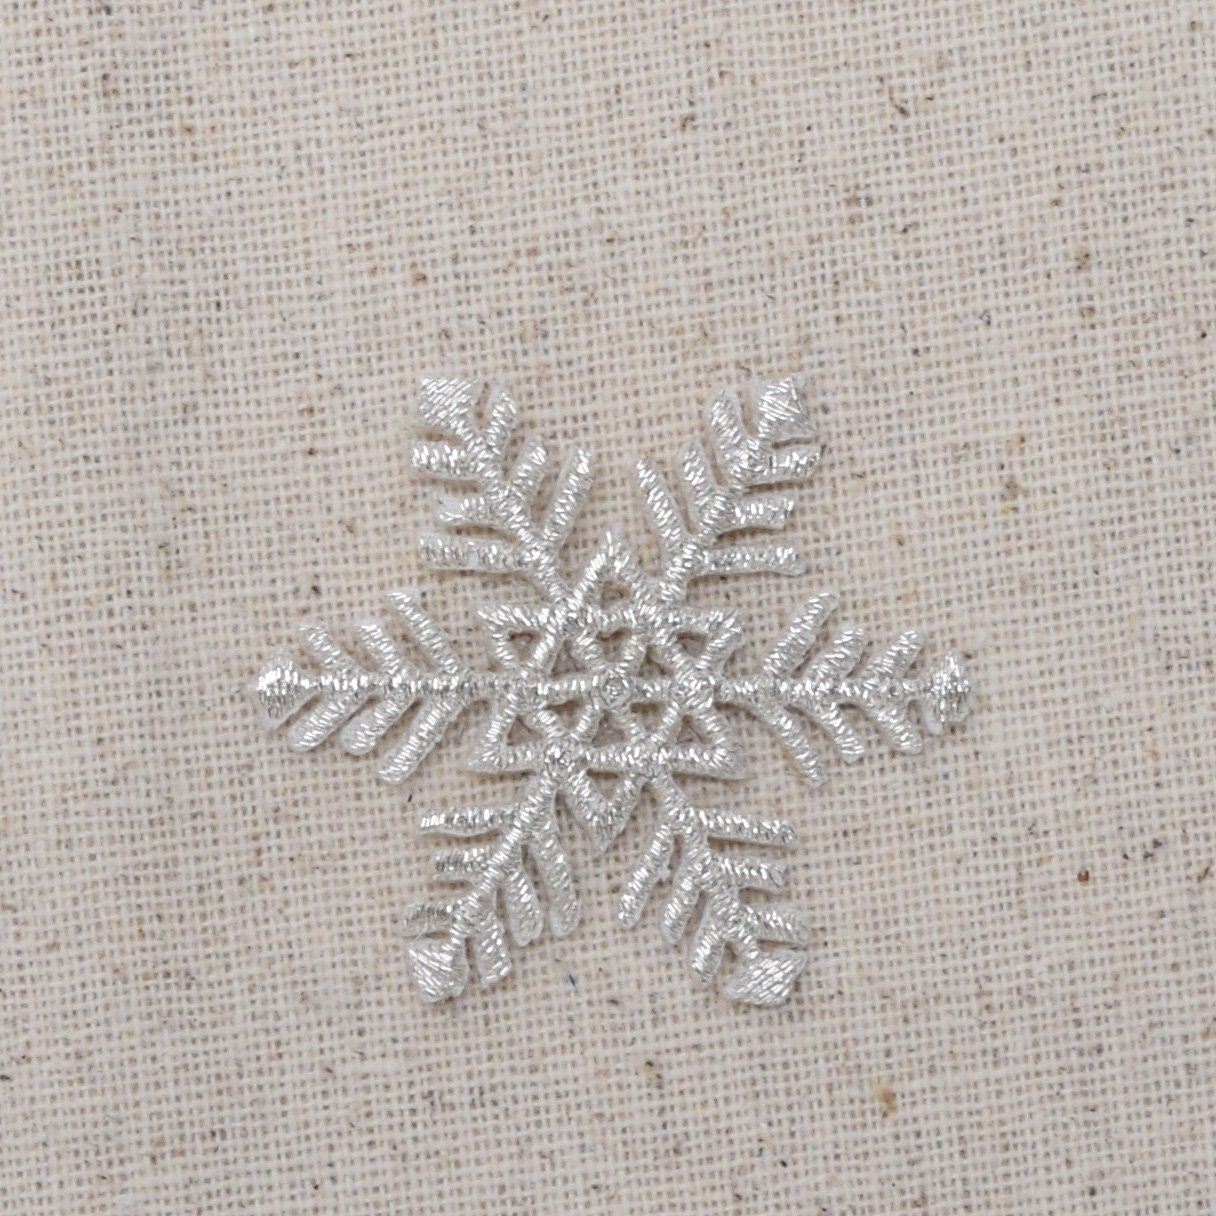 Snowflake - SILVER, GOLD, or WHITE - Iron on Applique - Embroidered Patch - 695706